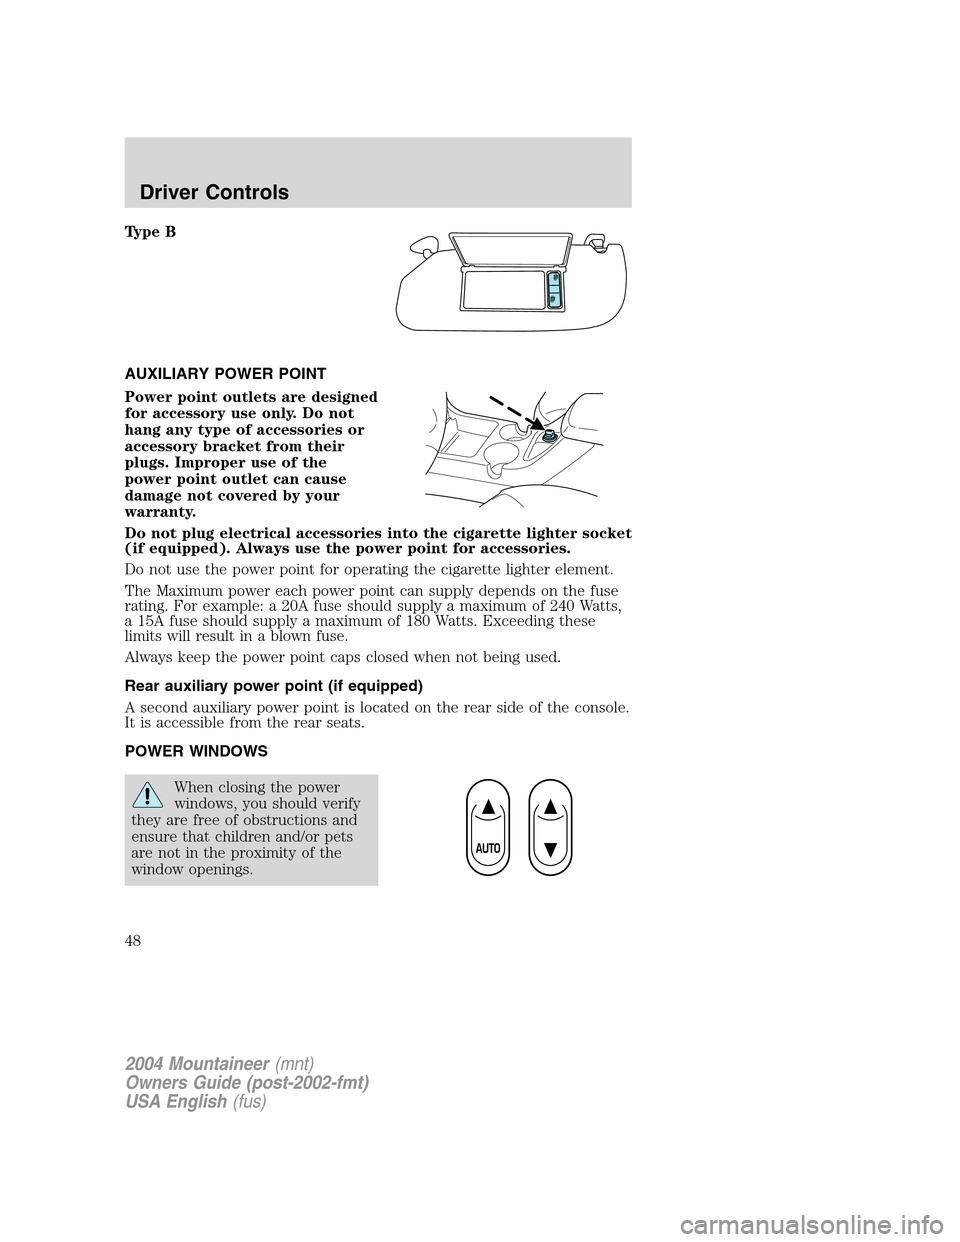 Mercury Mountaineer 2004  Owners Manuals Type B
AUXILIARY POWER POINT
Power point outlets are designed
for accessory use only. Do not
hang any type of accessories or
accessory bracket from their
plugs. Improper use of the
power point outlet 